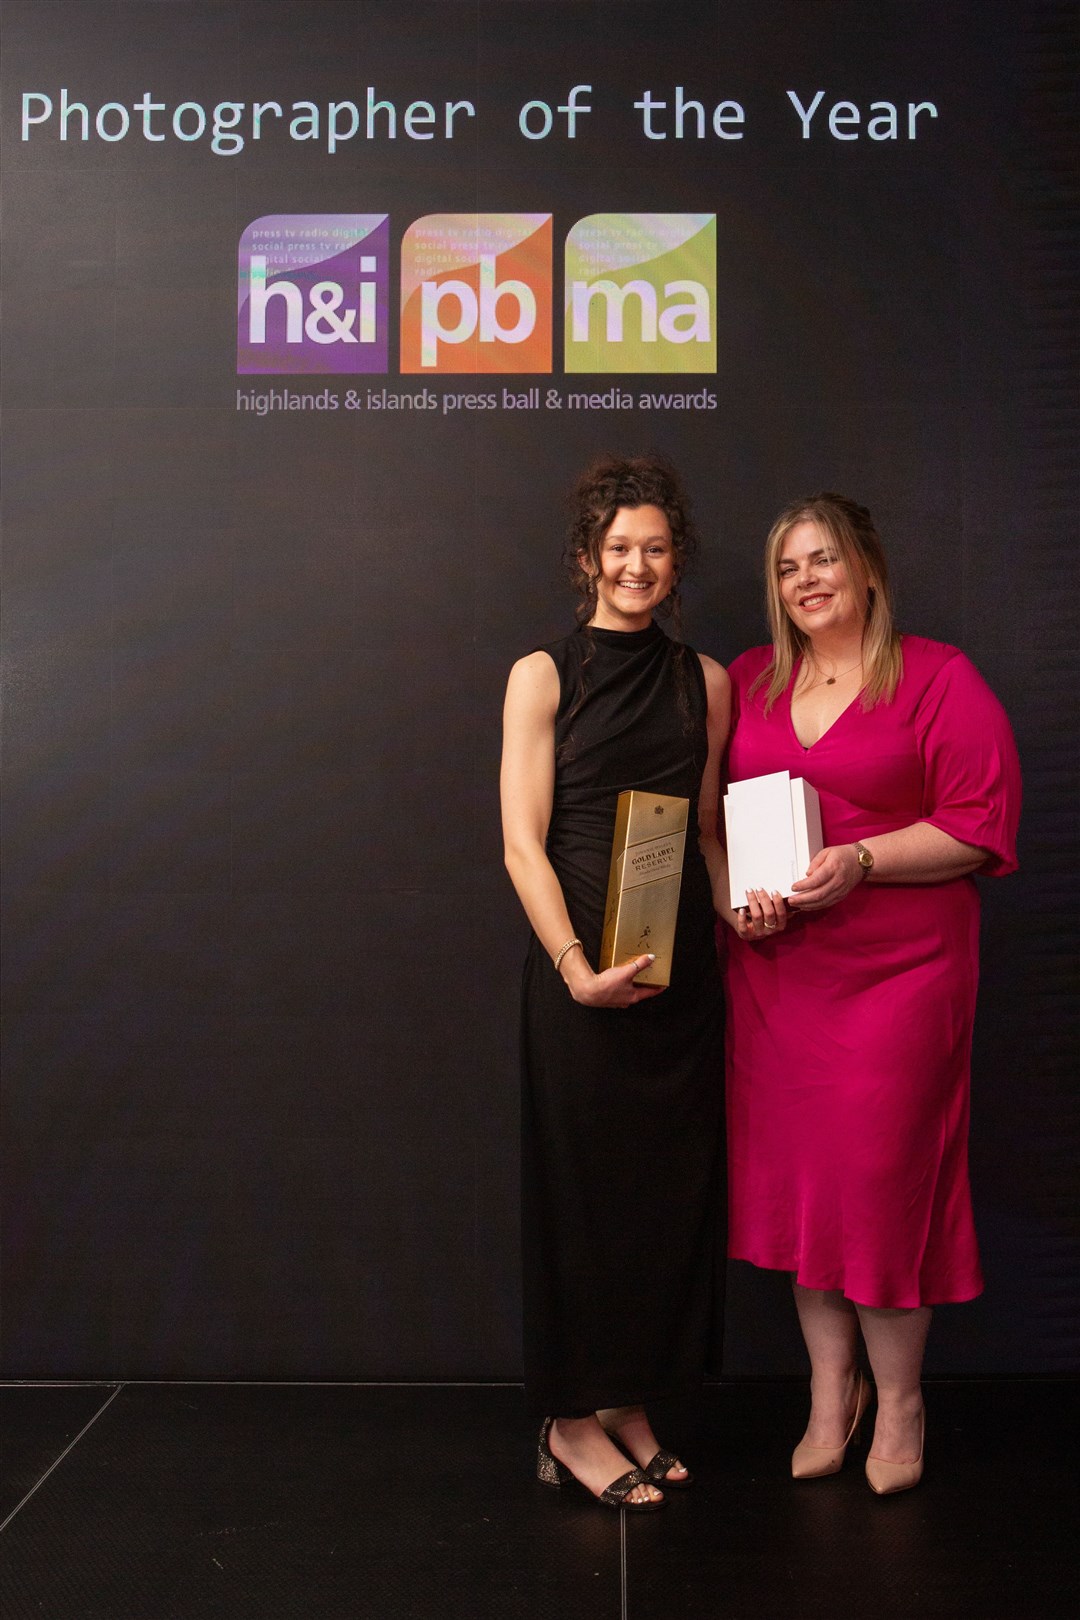 Beth Taylor (left) was crowned photographer of the year. Alison Gilbert